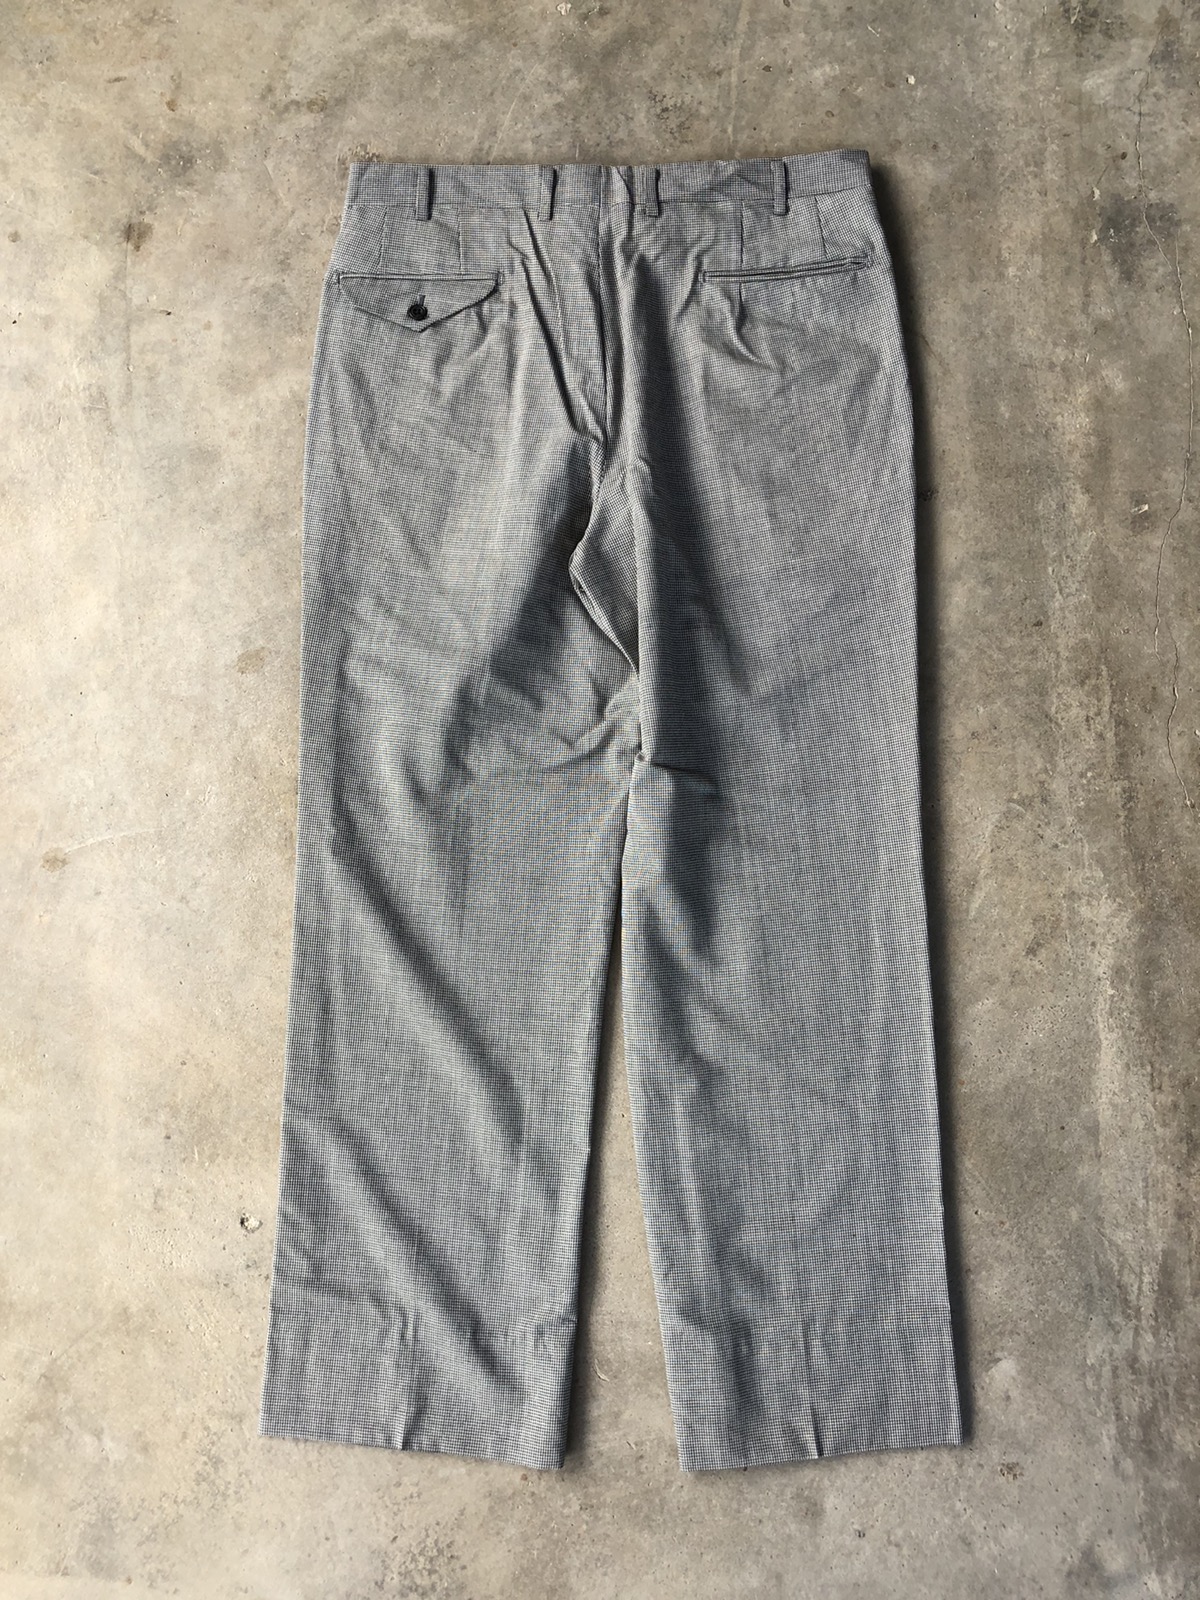 Vintage Burberry’s Baggy Casual Pant - 5